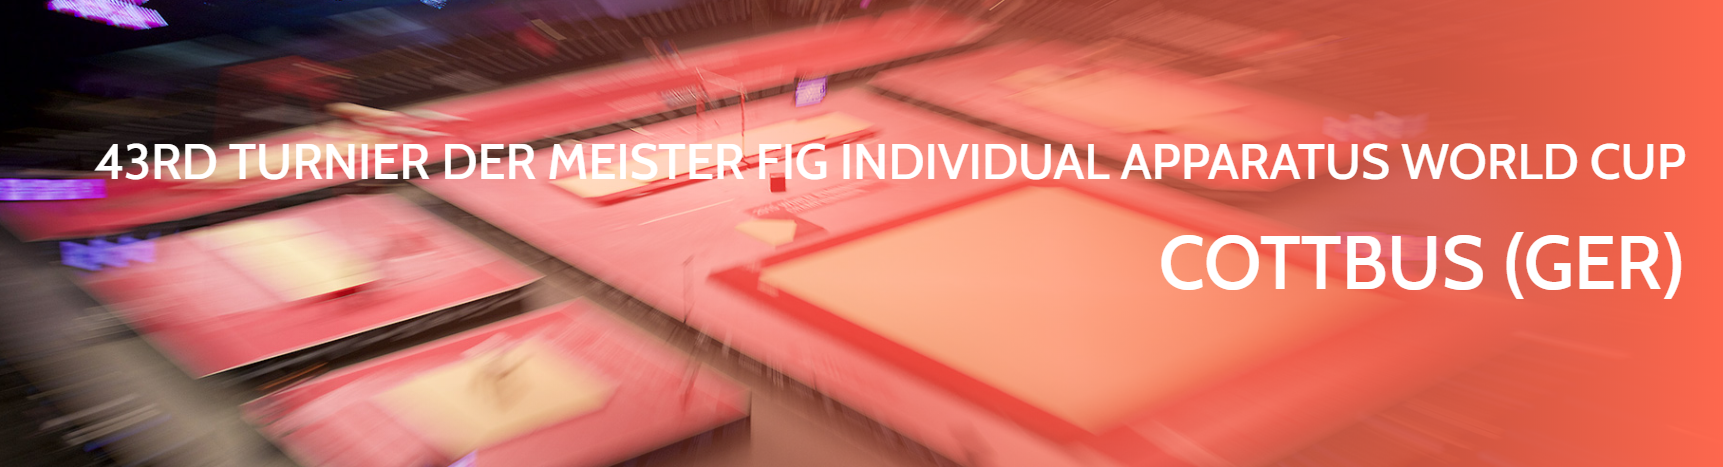 German city Cottbus is set to host an International Gymnastics Federation Individual Apparatus World Cup over the coming four days ©FIG